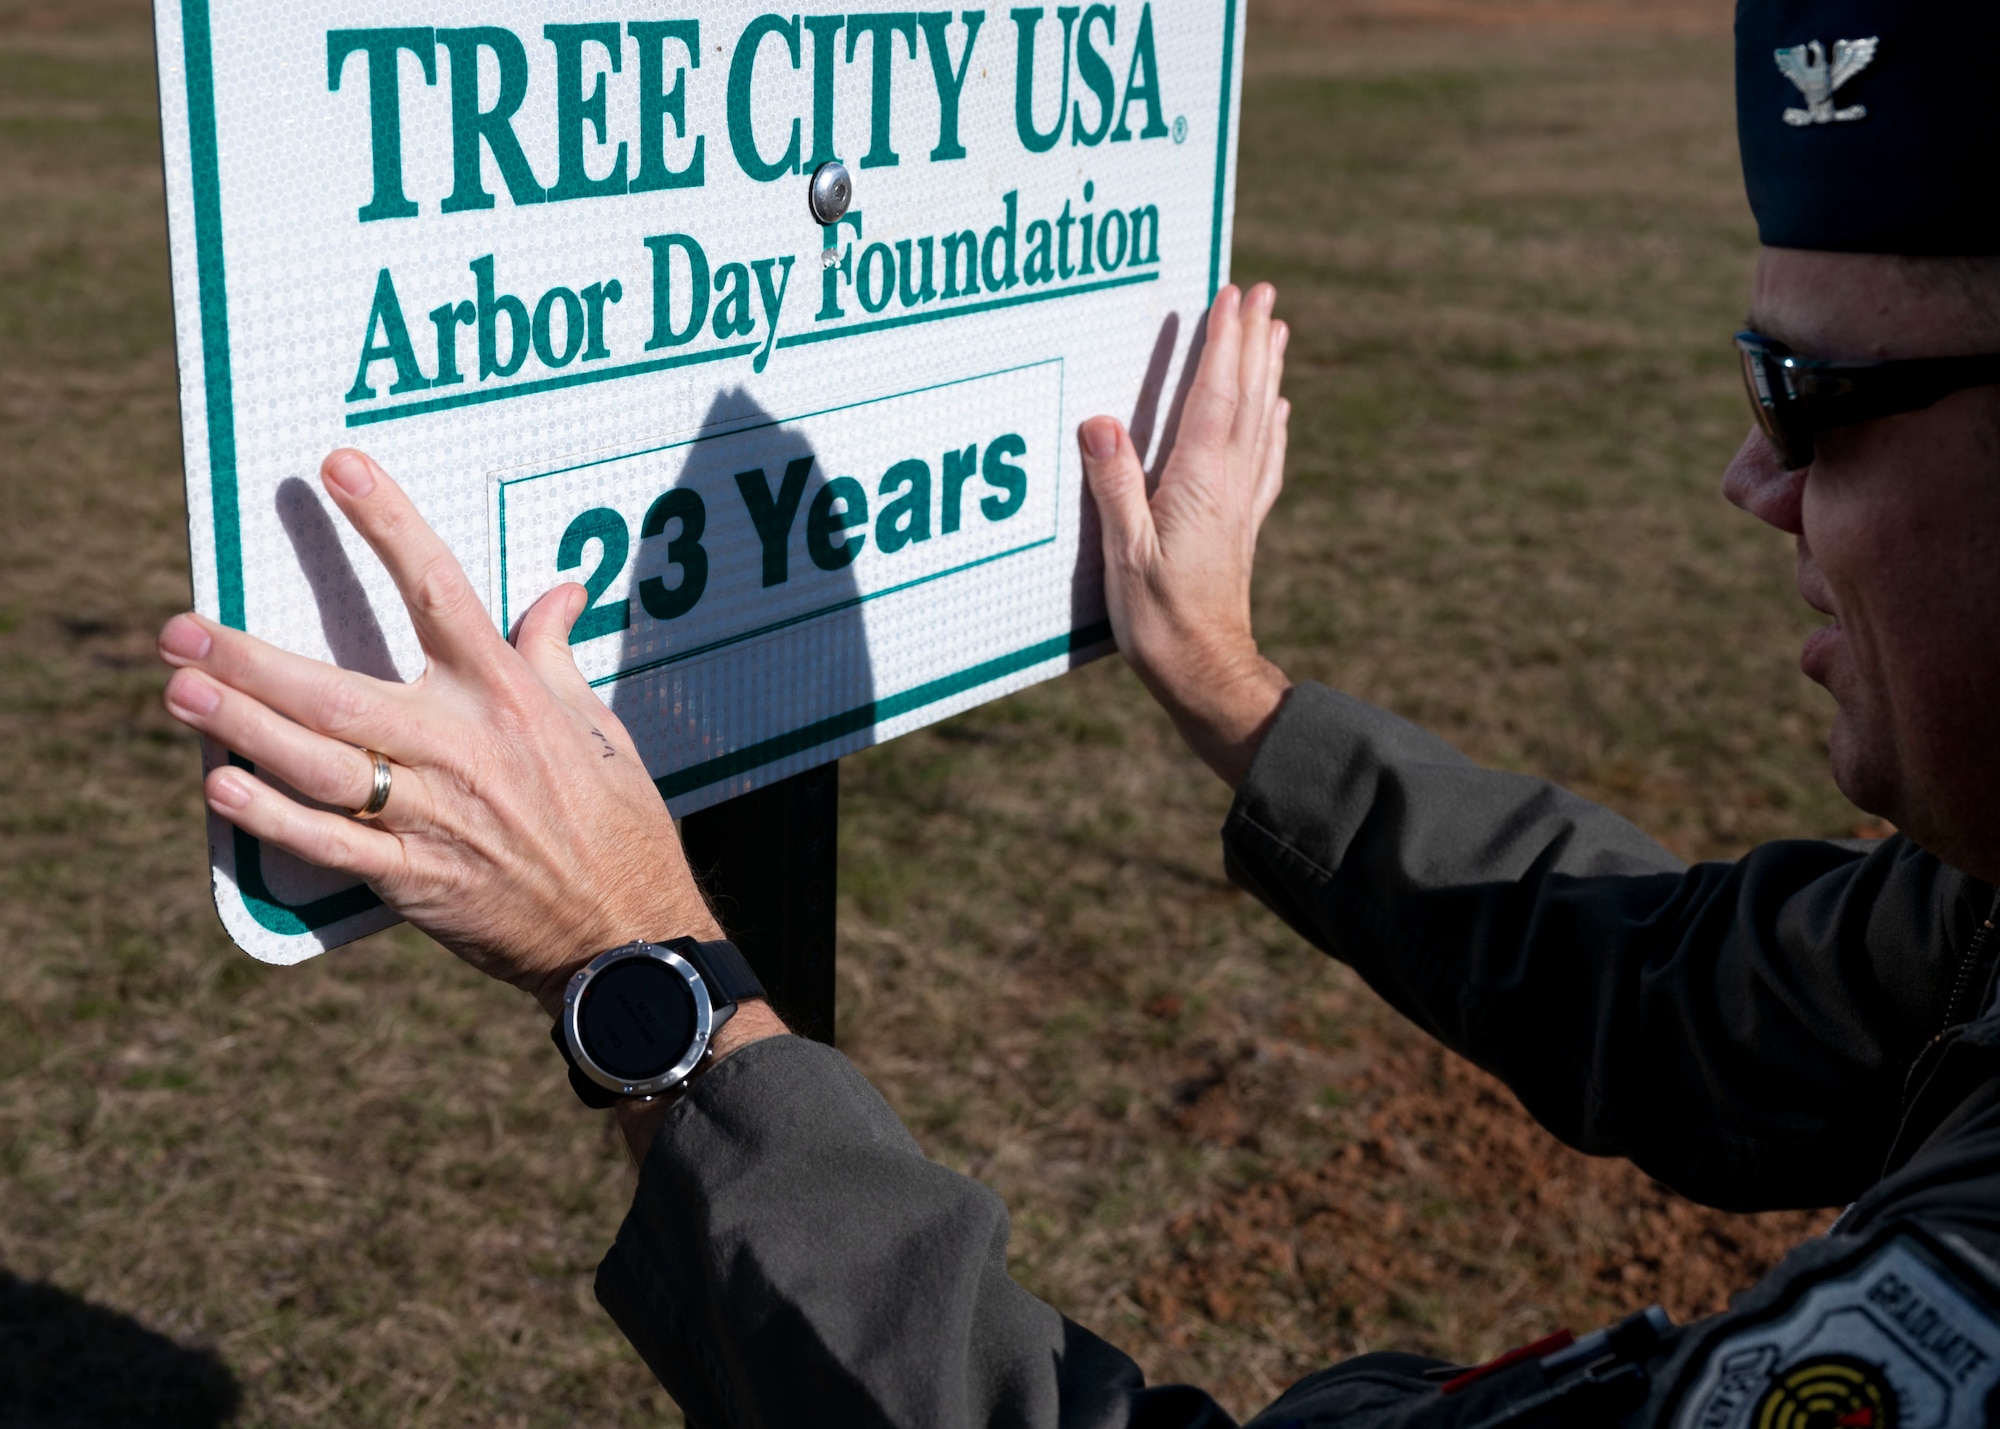 20th Fighter Wing Col. updates the Tree City USA sign to show 23 years.